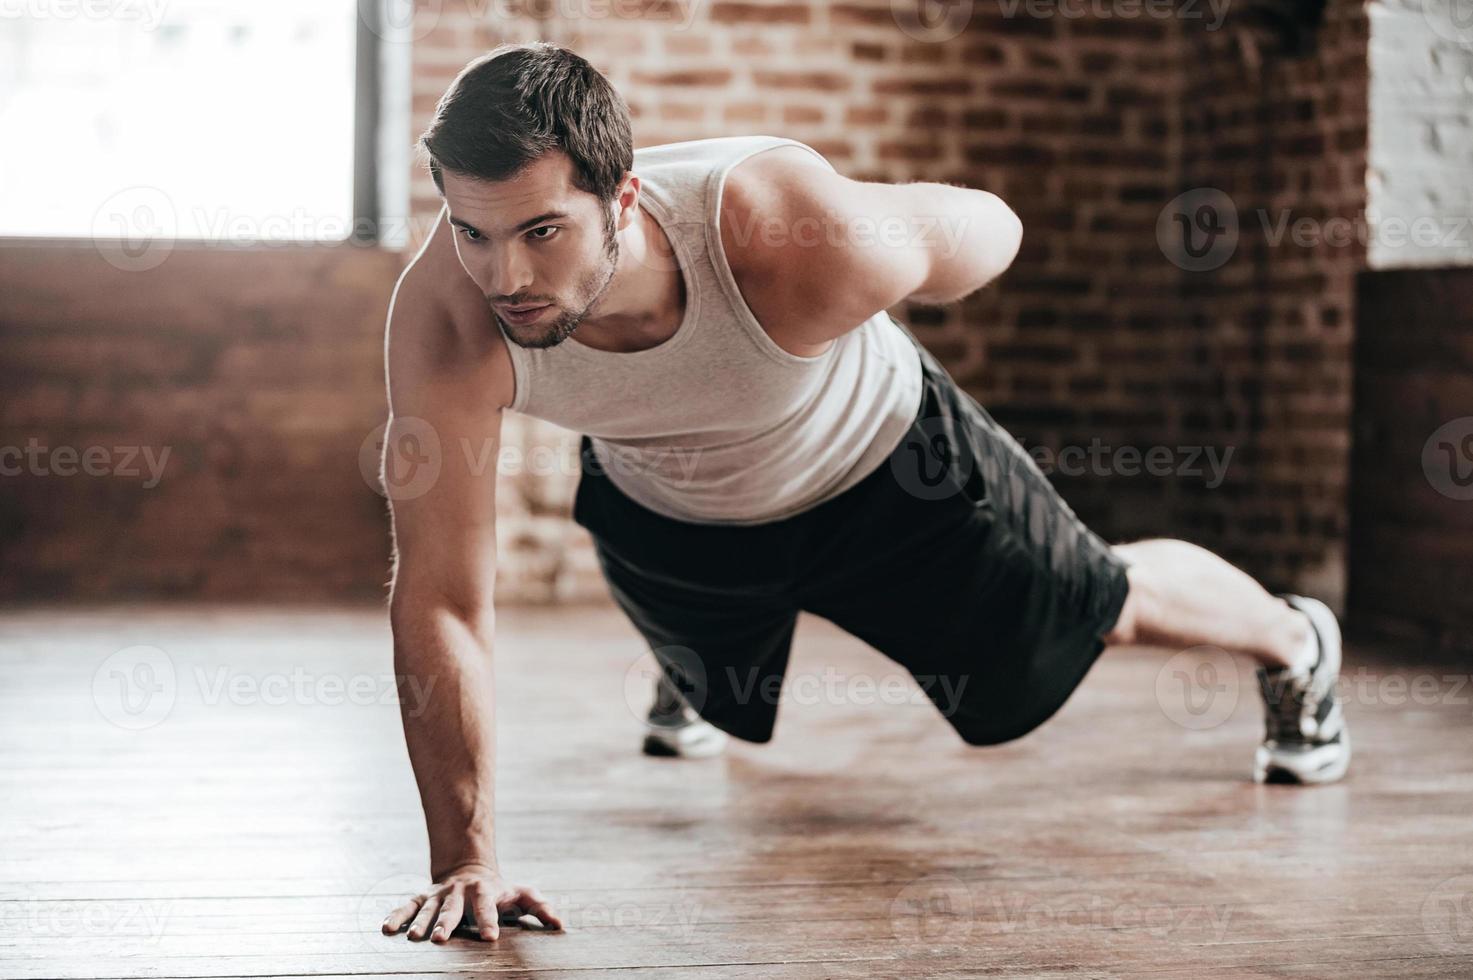 https://static.vecteezy.com/system/resources/previews/013/452/380/non_2x/one-hand-push-up-confident-muscled-young-man-wearing-sport-wear-and-doing-one-hand-push-up-while-exercising-on-the-floor-in-loft-interior-photo.jpg